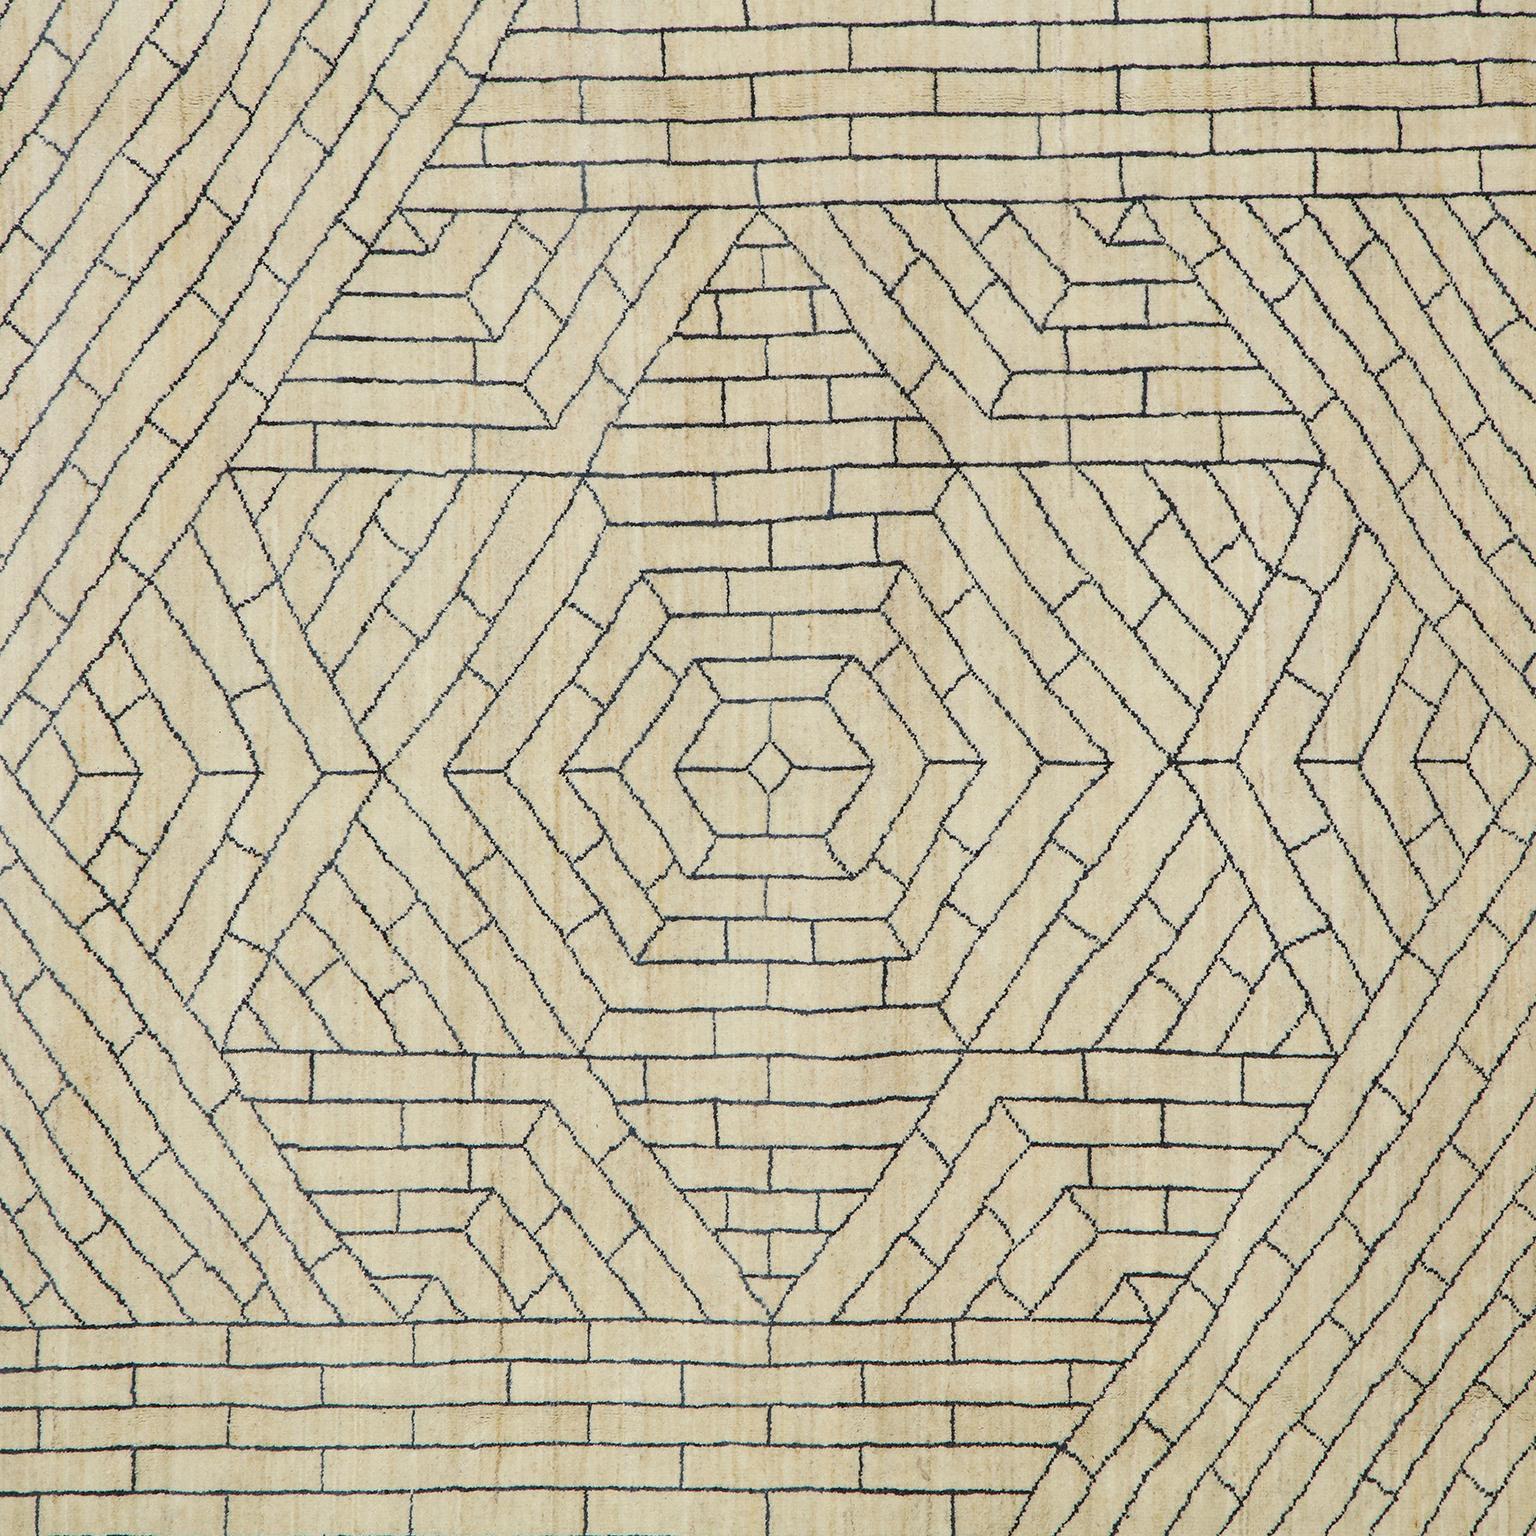 A cream background and gray design make this modern area rug shine with its geometric design. Created by Orley Shabahang using the techniques that had been utilized for generations in carpetmaking, the design actually derives its influence from the